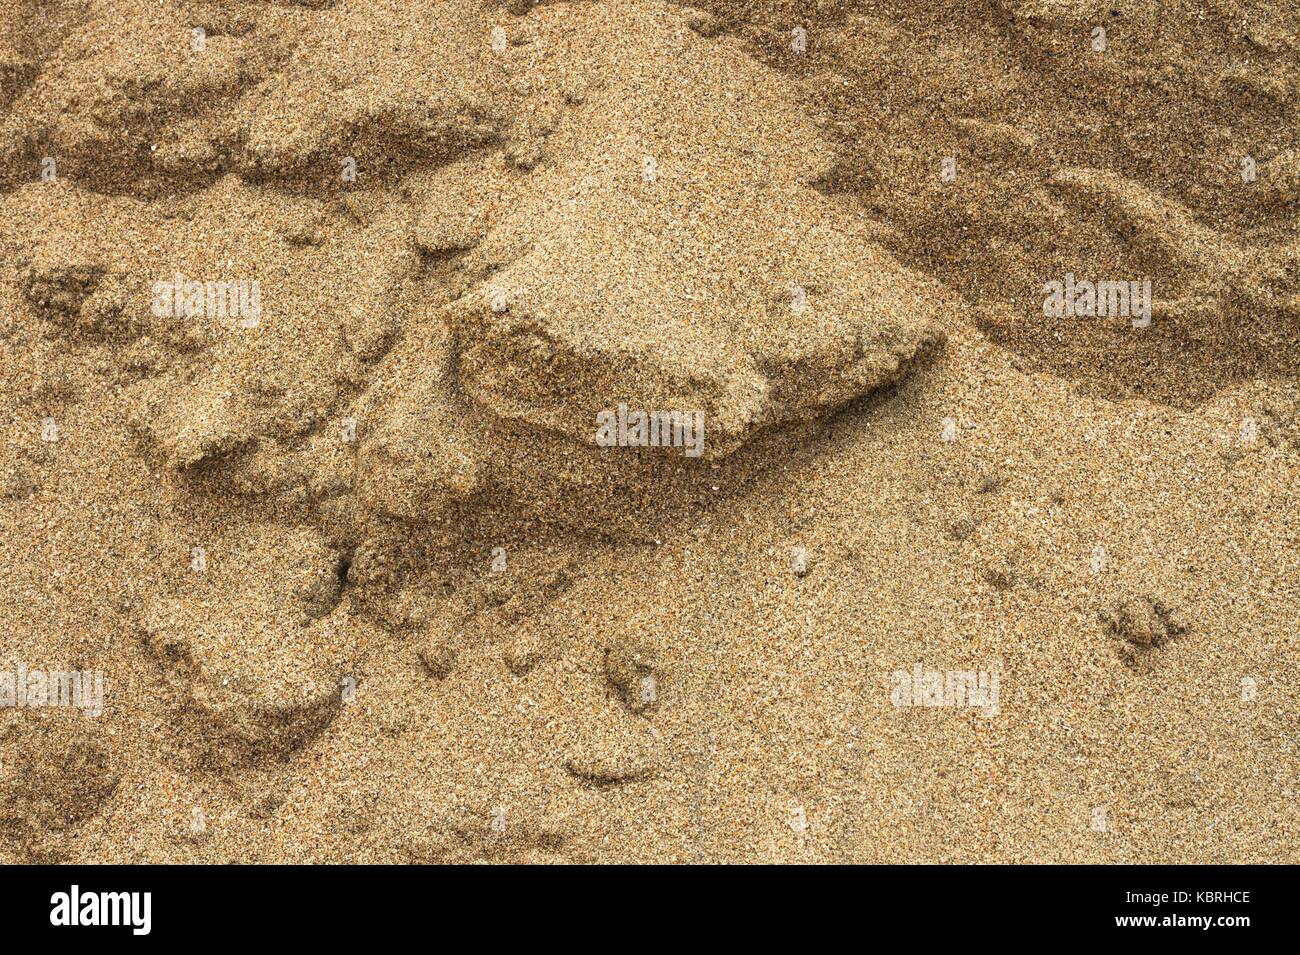 Close up image of sand in a sand bank. Stock Photo